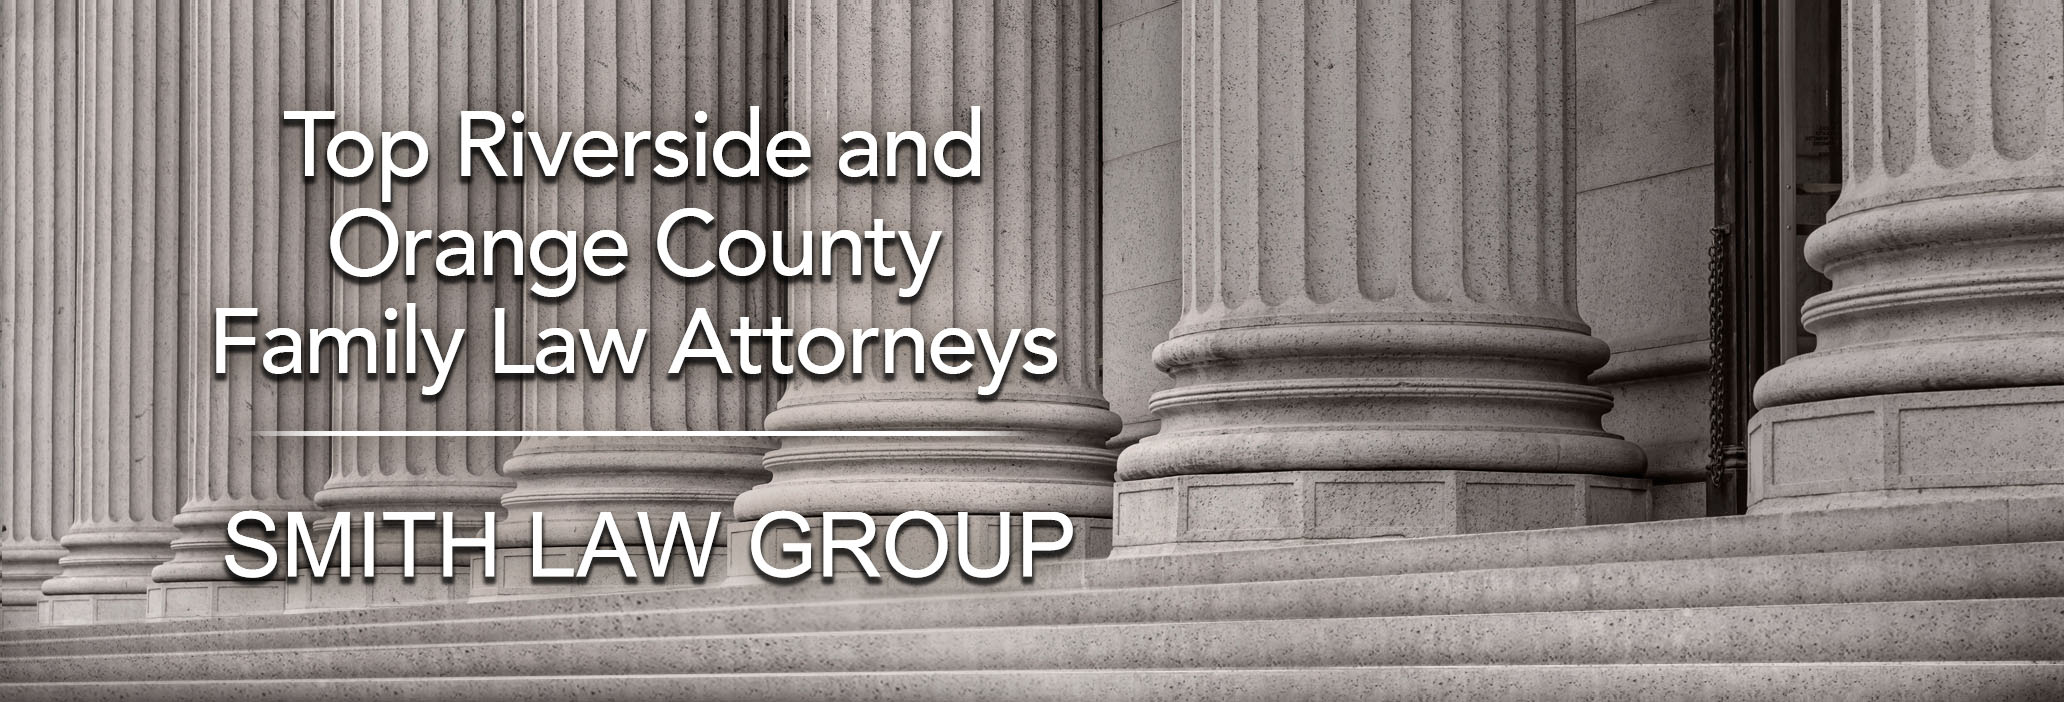 Top Riverside and Orange County Family Law Attorneys - Smith Law Group